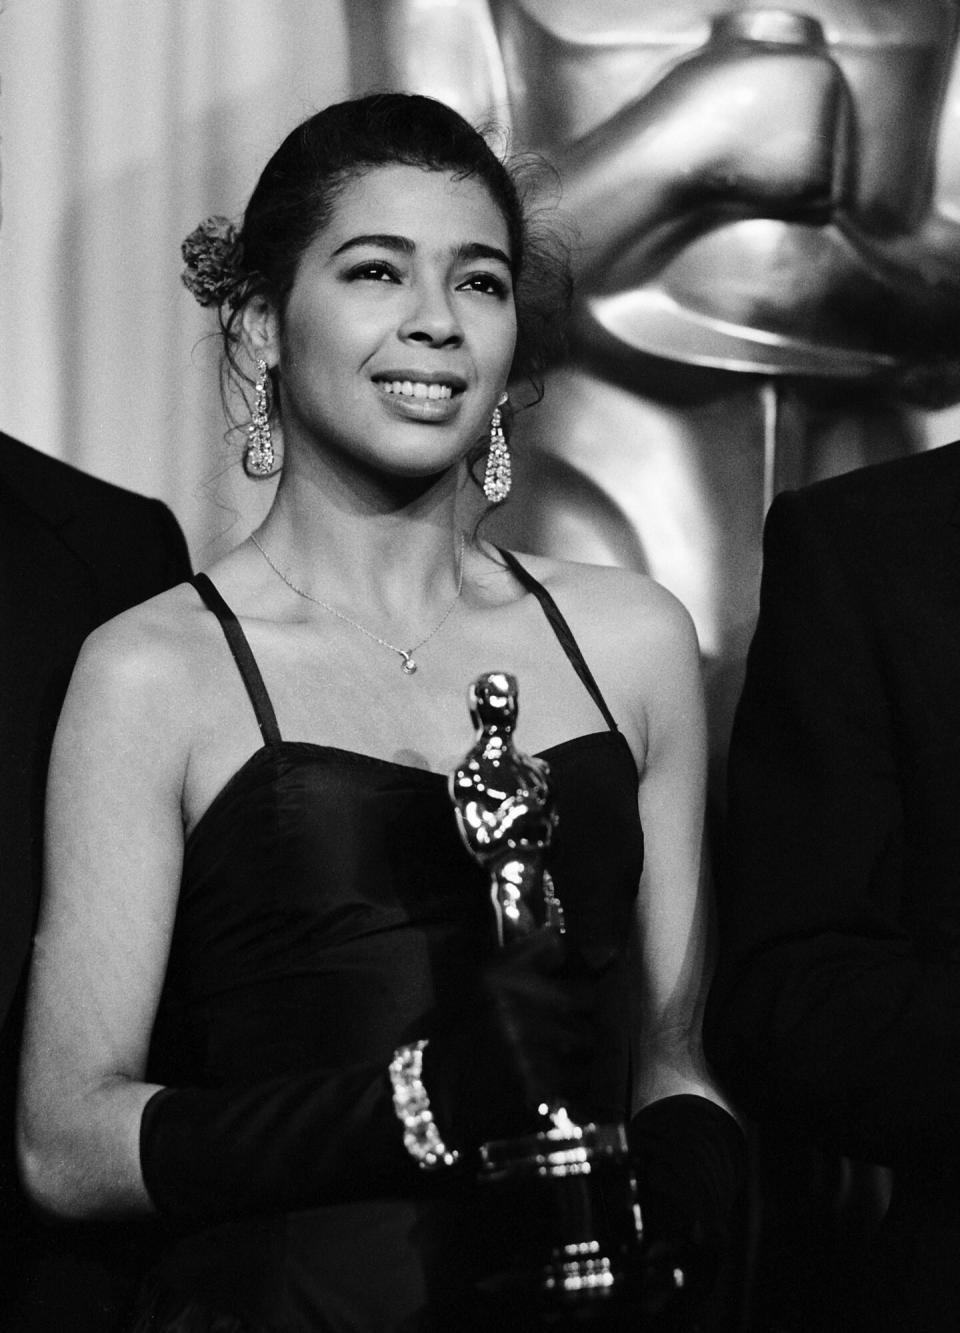 LOS ANGELES, CA - APRIL 9: Winner Irene Cara at the 56th Annual Academy Awards, April 9, 1984 in Los Angeles, California.  (Photo by Getty Images/Bob Reha Jr.)